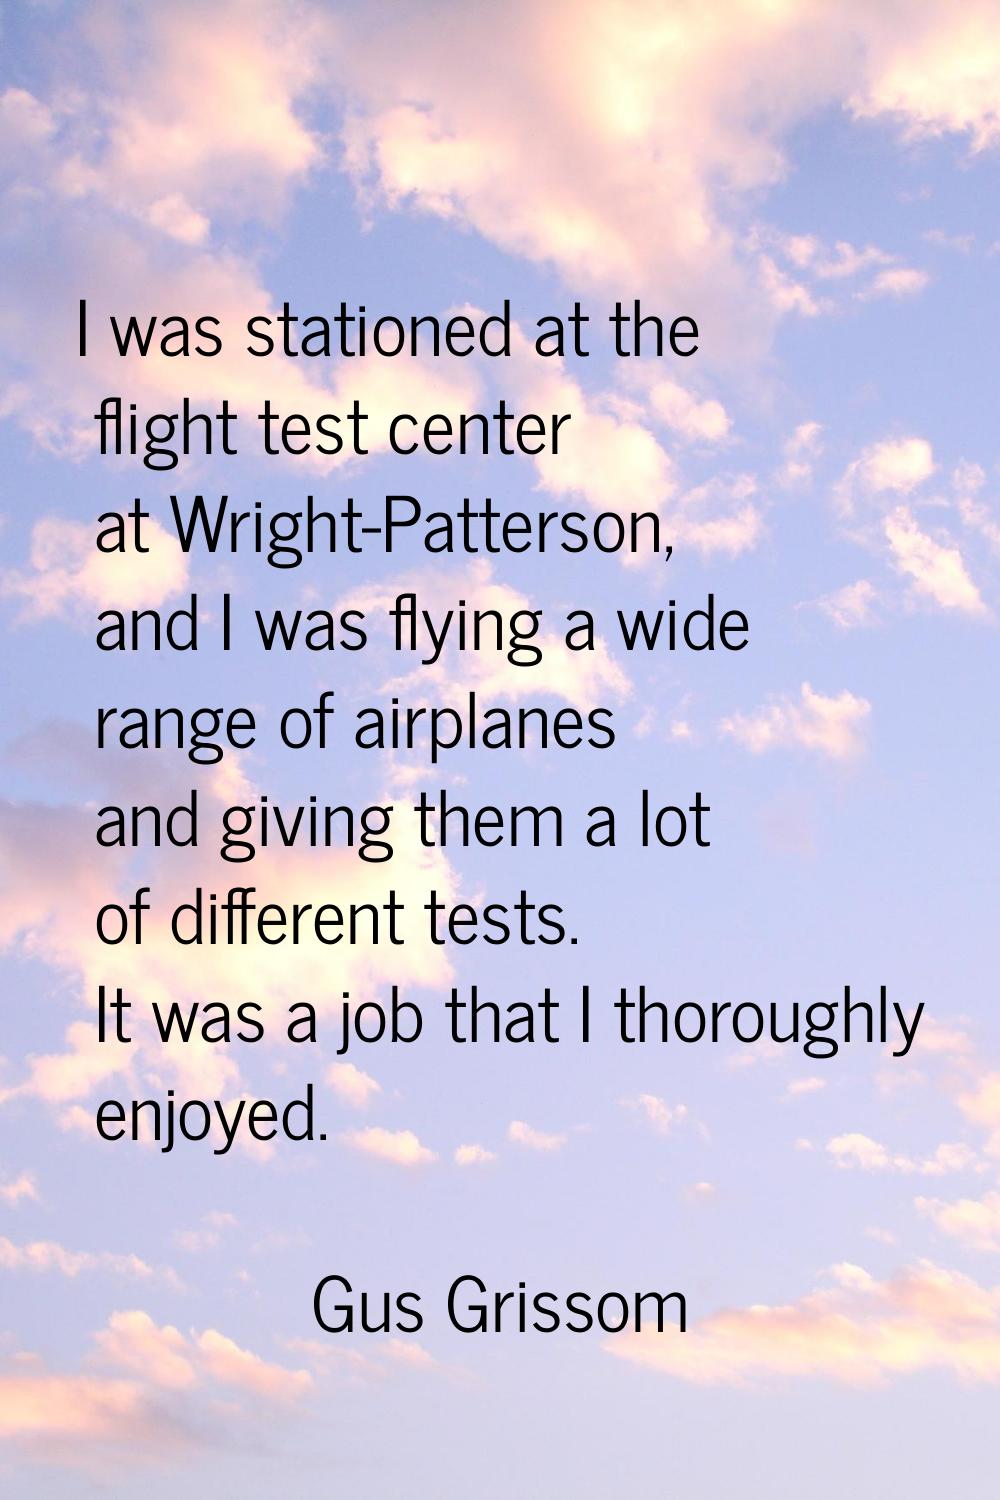 I was stationed at the flight test center at Wright-Patterson, and I was flying a wide range of air